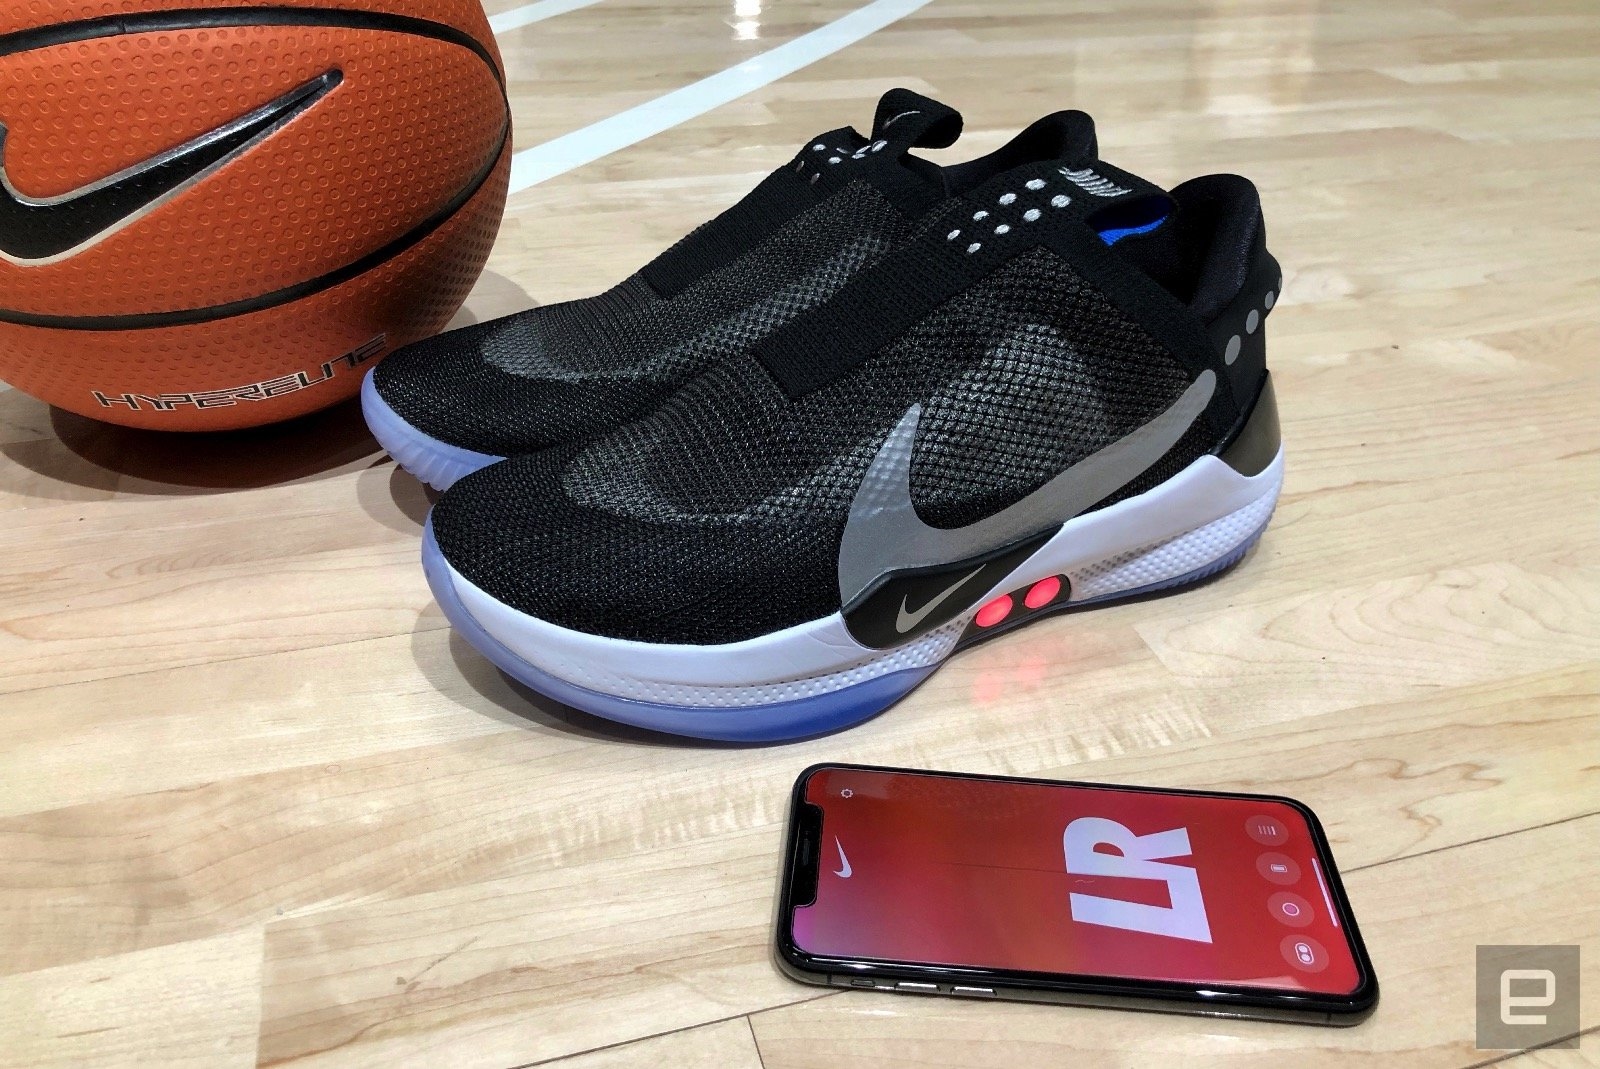 A closer look at Nike's Adapt BB auto-lacing basketball shoes | DeviceDaily.com